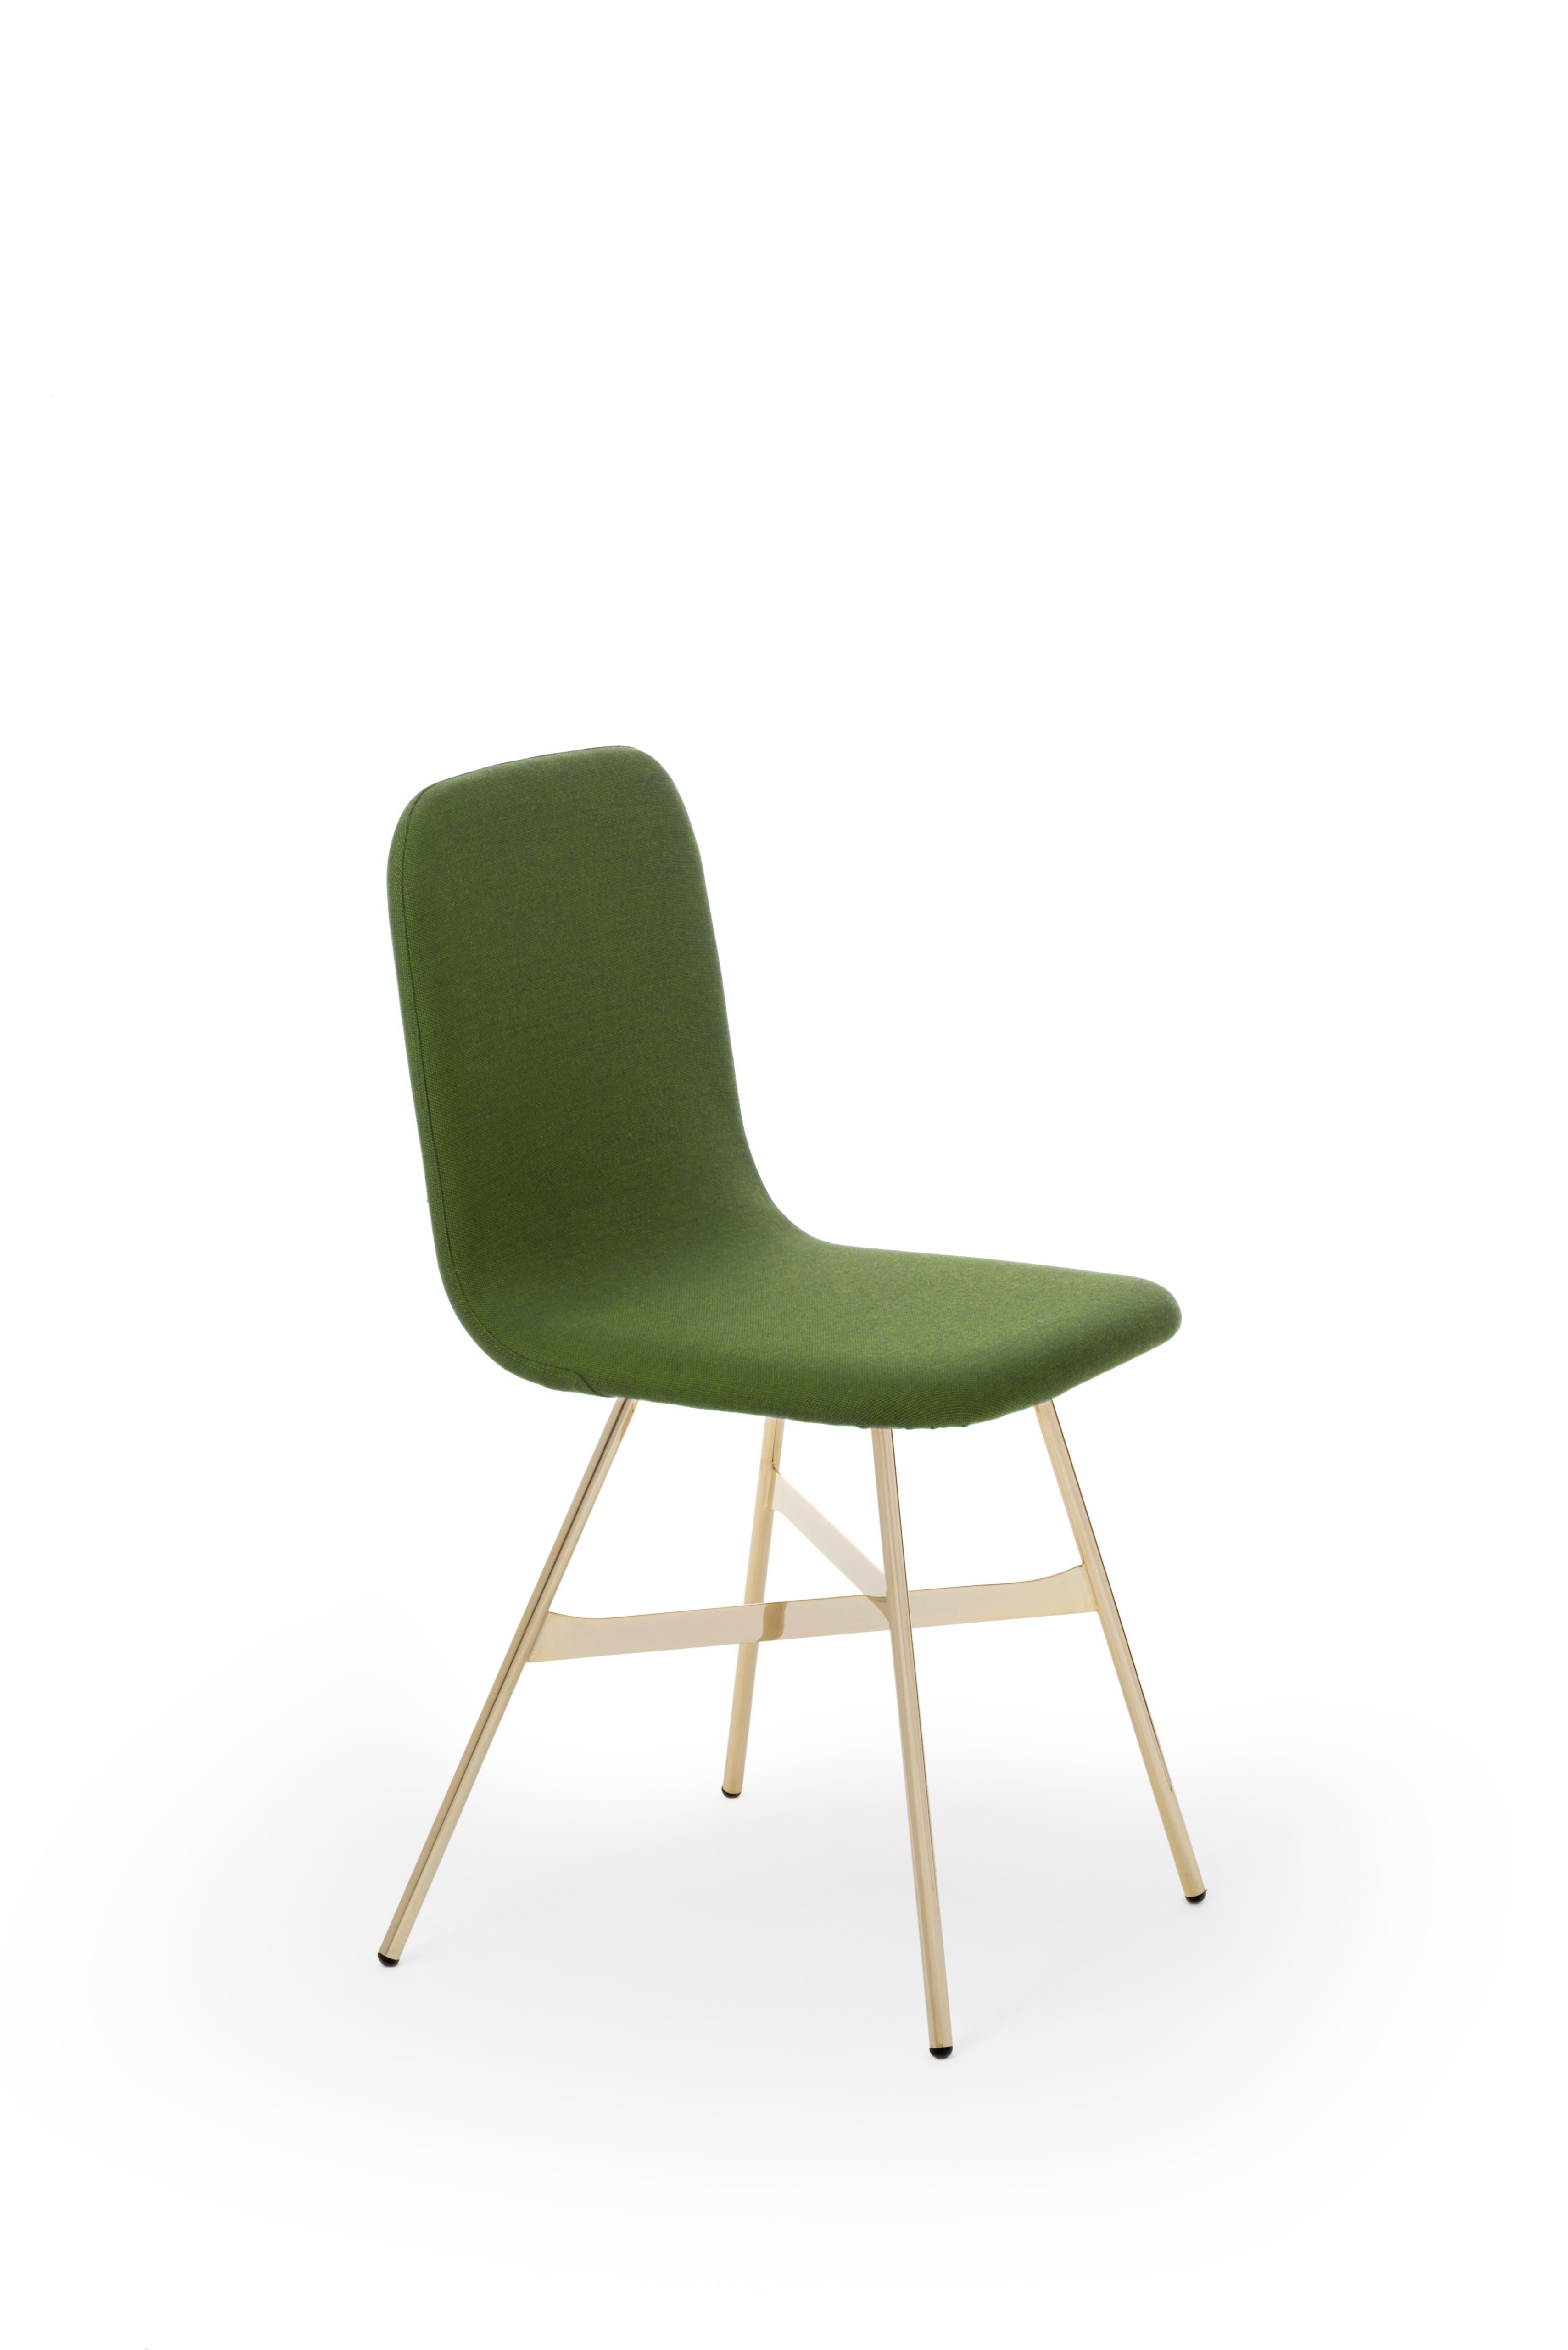 A simple but very elegant chair inspired to graphic art and combining the precious metal used for the legs with the simple and hieratic line of the seat, suggesting interesting and dynamic effects, displayed around a table.
The seat is a plywood